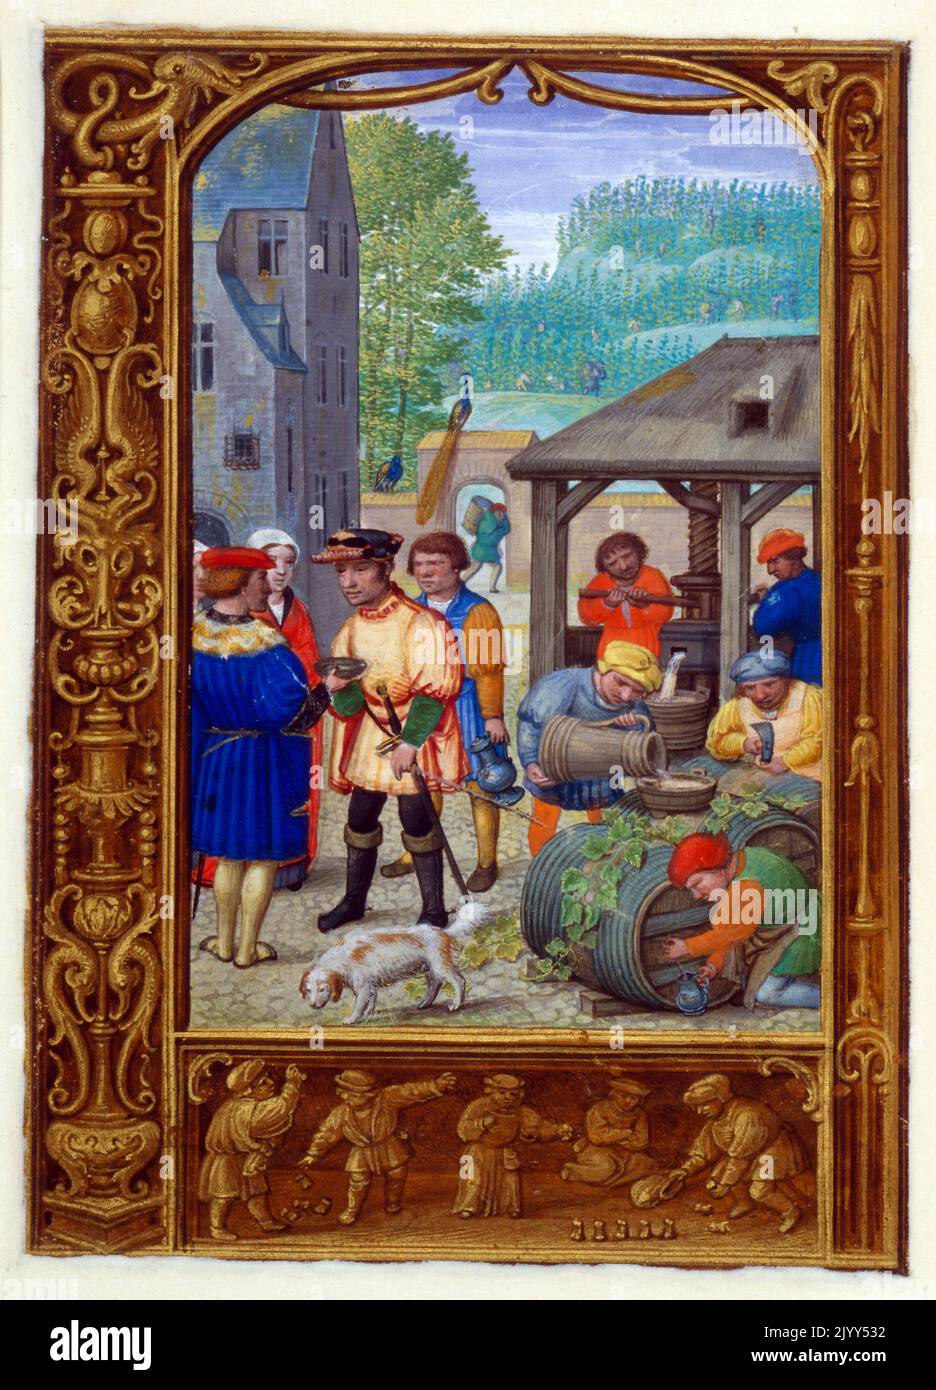 Flemish 16th century, illuminated calendar depicting peasants playing knuckle-bones and skittles in a town square. Stock Photo